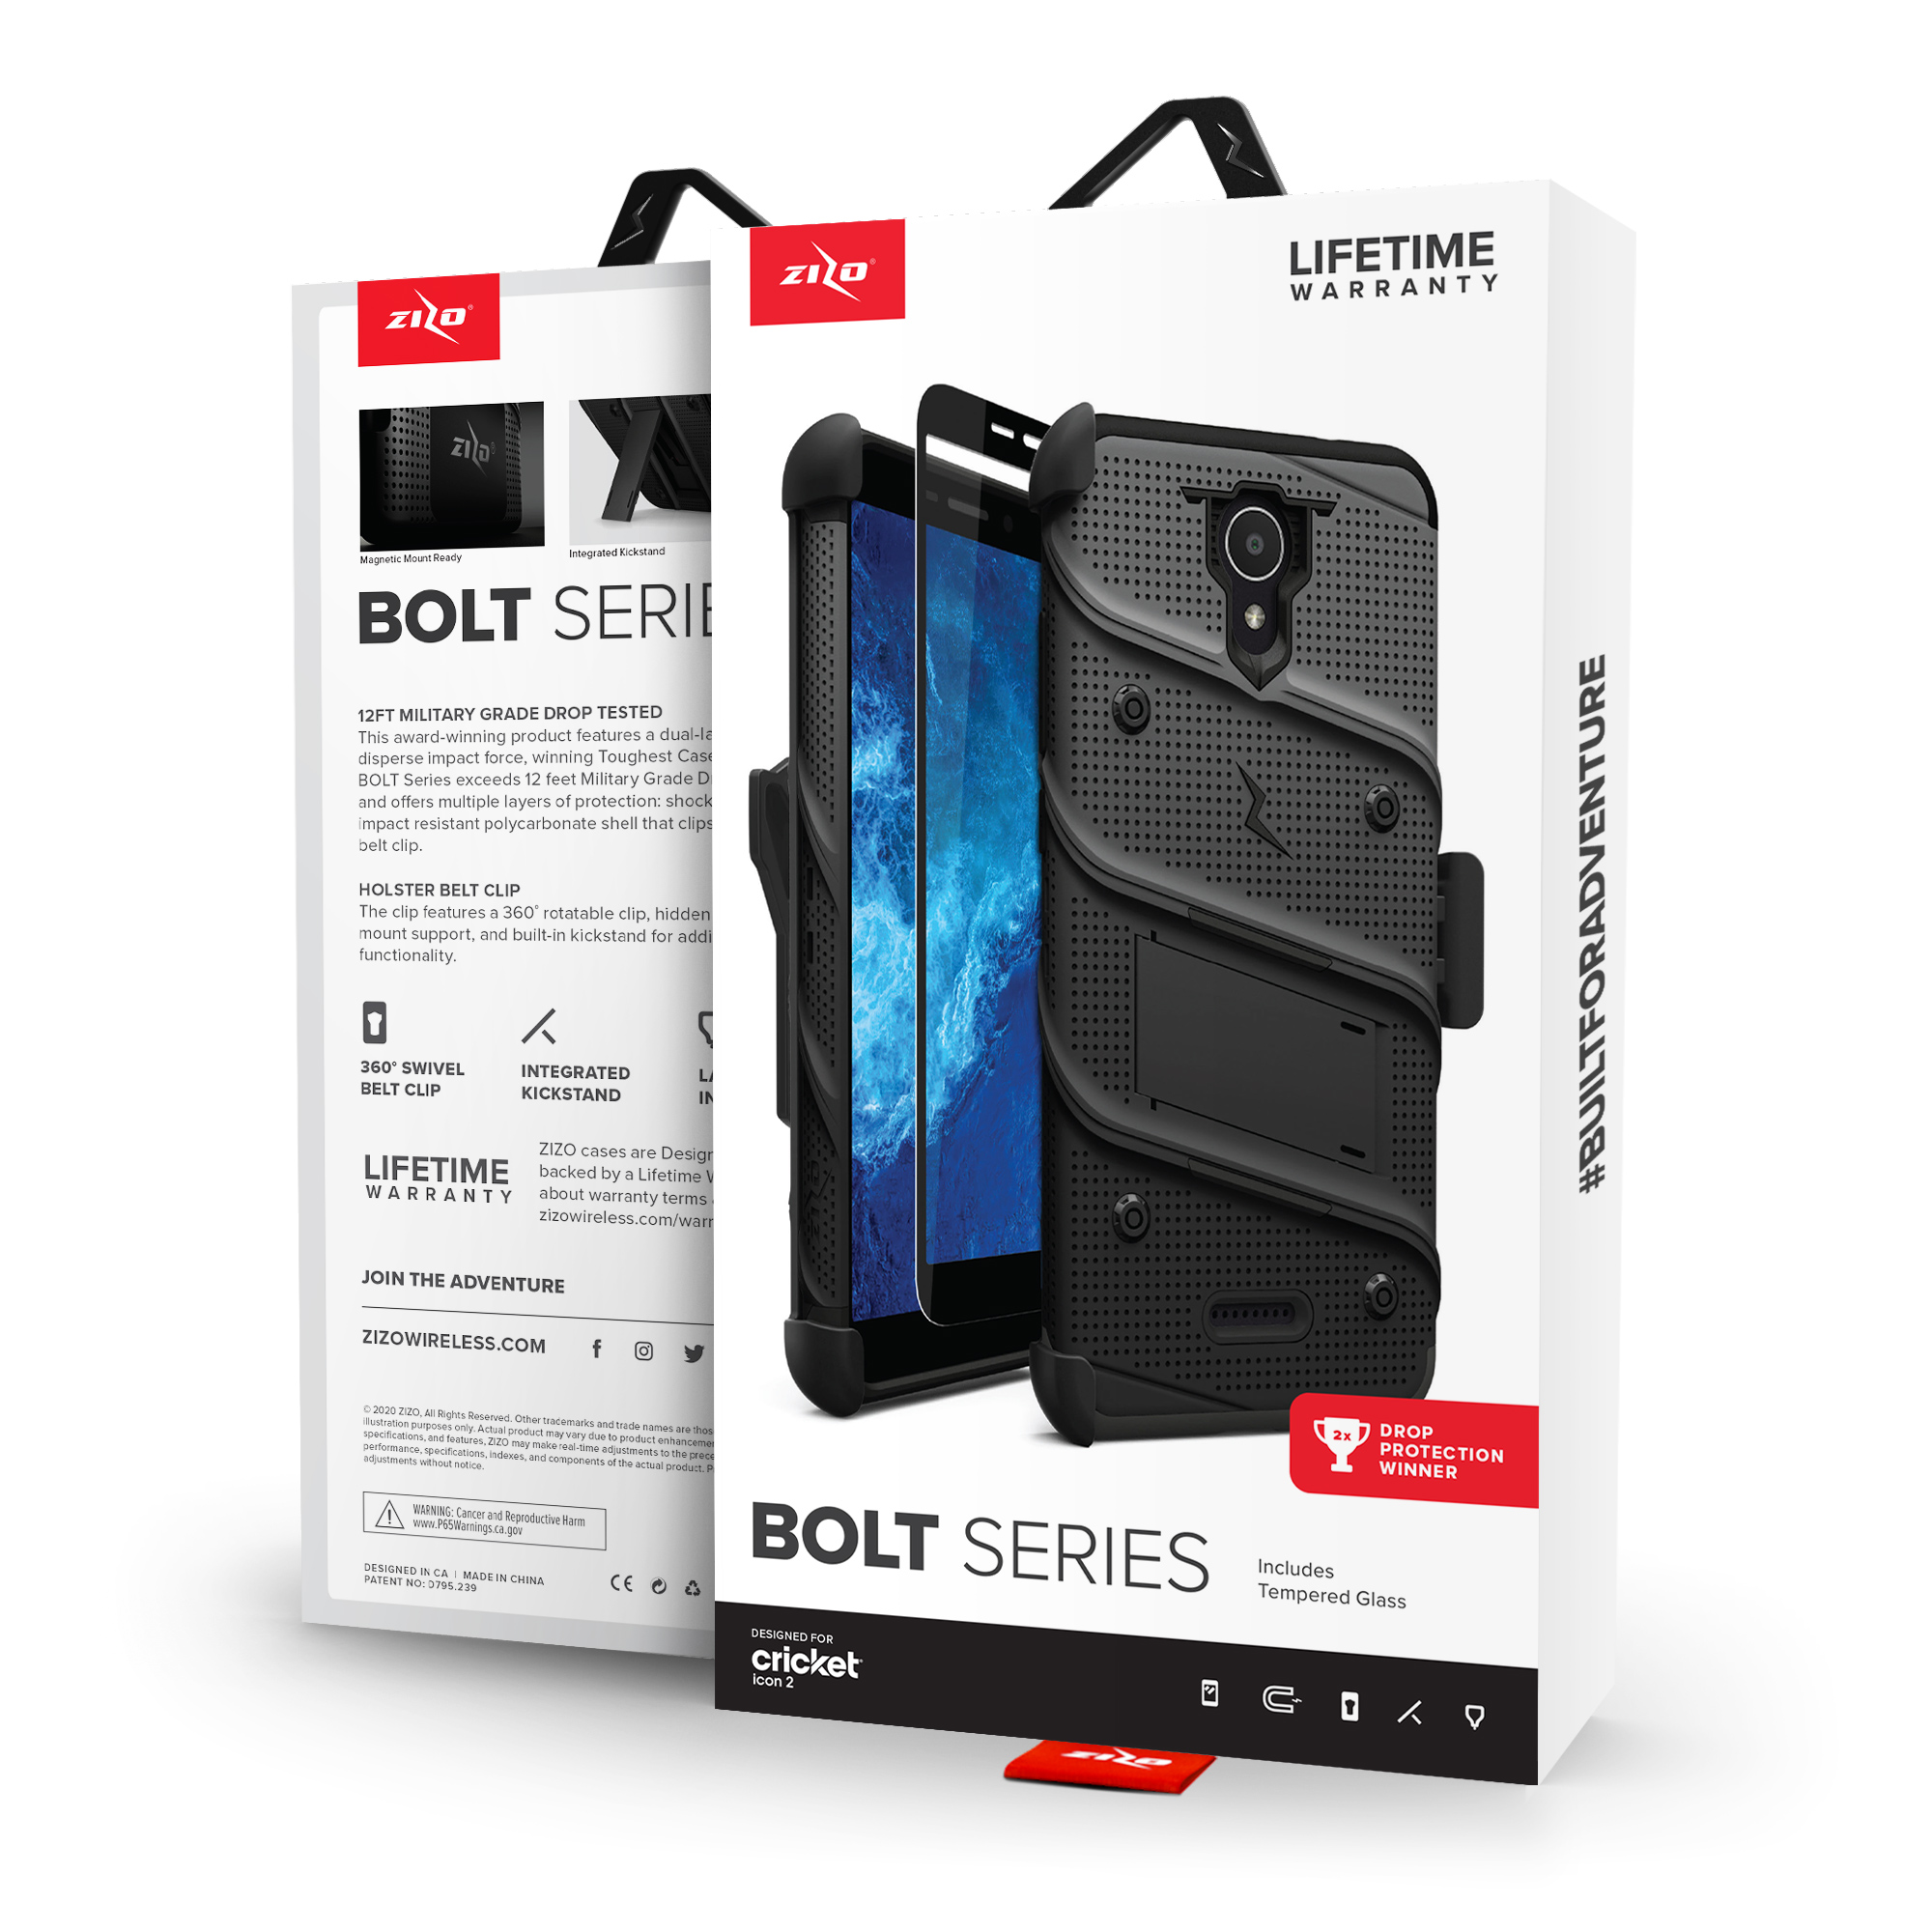 CRICKET ICON 2 ZIZO BOLT SERIES CASE WITH TEMPERED GLASS - BLACK & BLACK (11006)